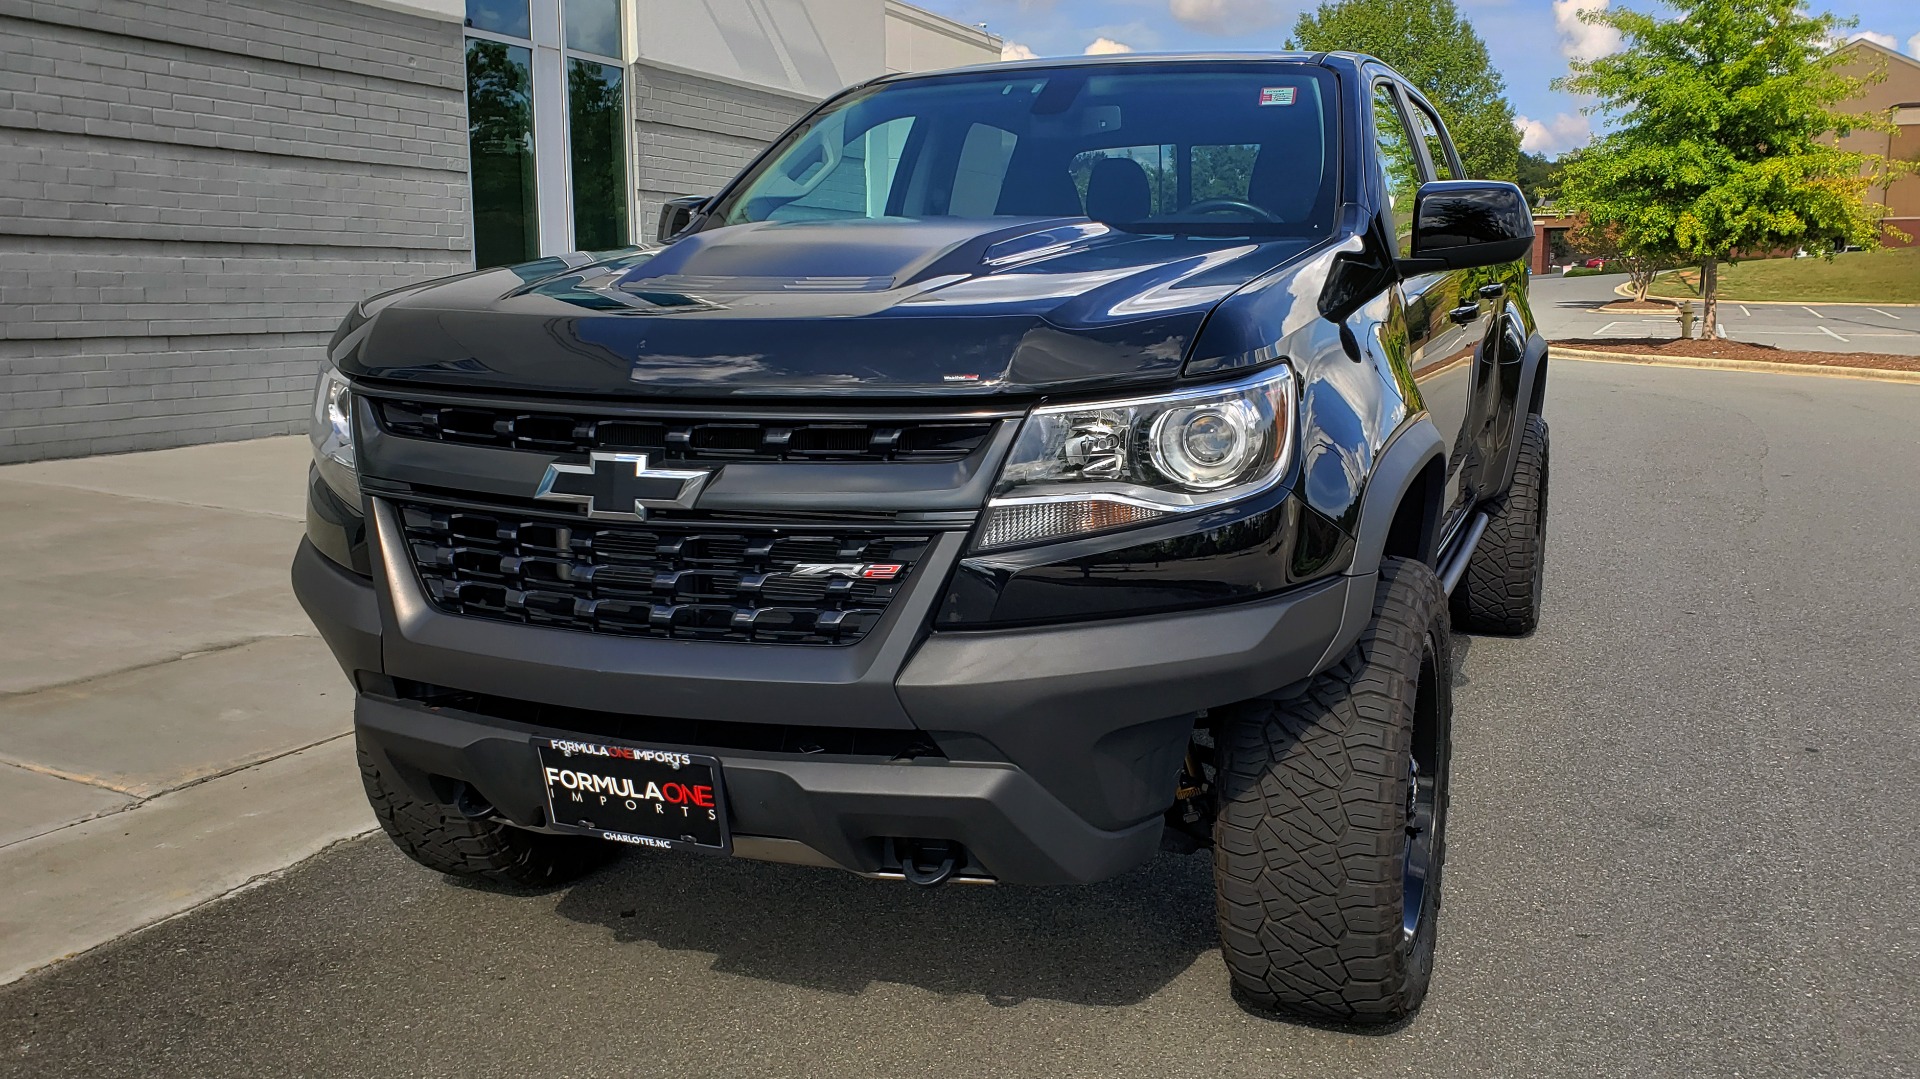 Used 2019 Chevrolet COLORADO 4WD ZR2 / 3.6L V6 / 8-SPD AUTO / CREWCAB / LEATHER / BOSE / REARVIEW for sale Sold at Formula Imports in Charlotte NC 28227 2